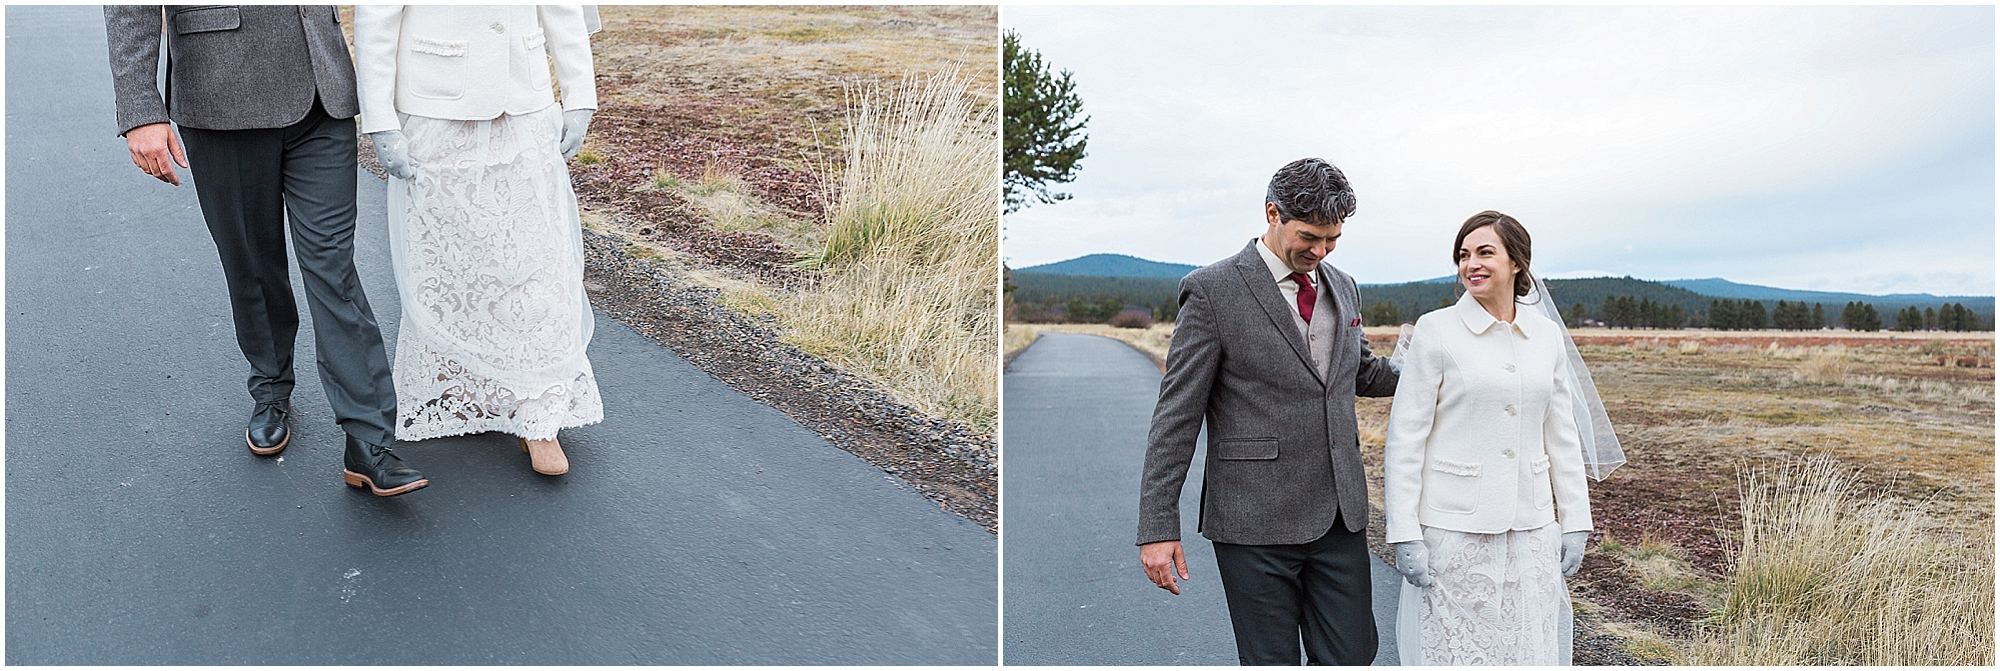 A few candid moments of the happy couple strolling along the bike path at their Sunriver Resort winter wedding in Oregon. | Erica Swantek Photography